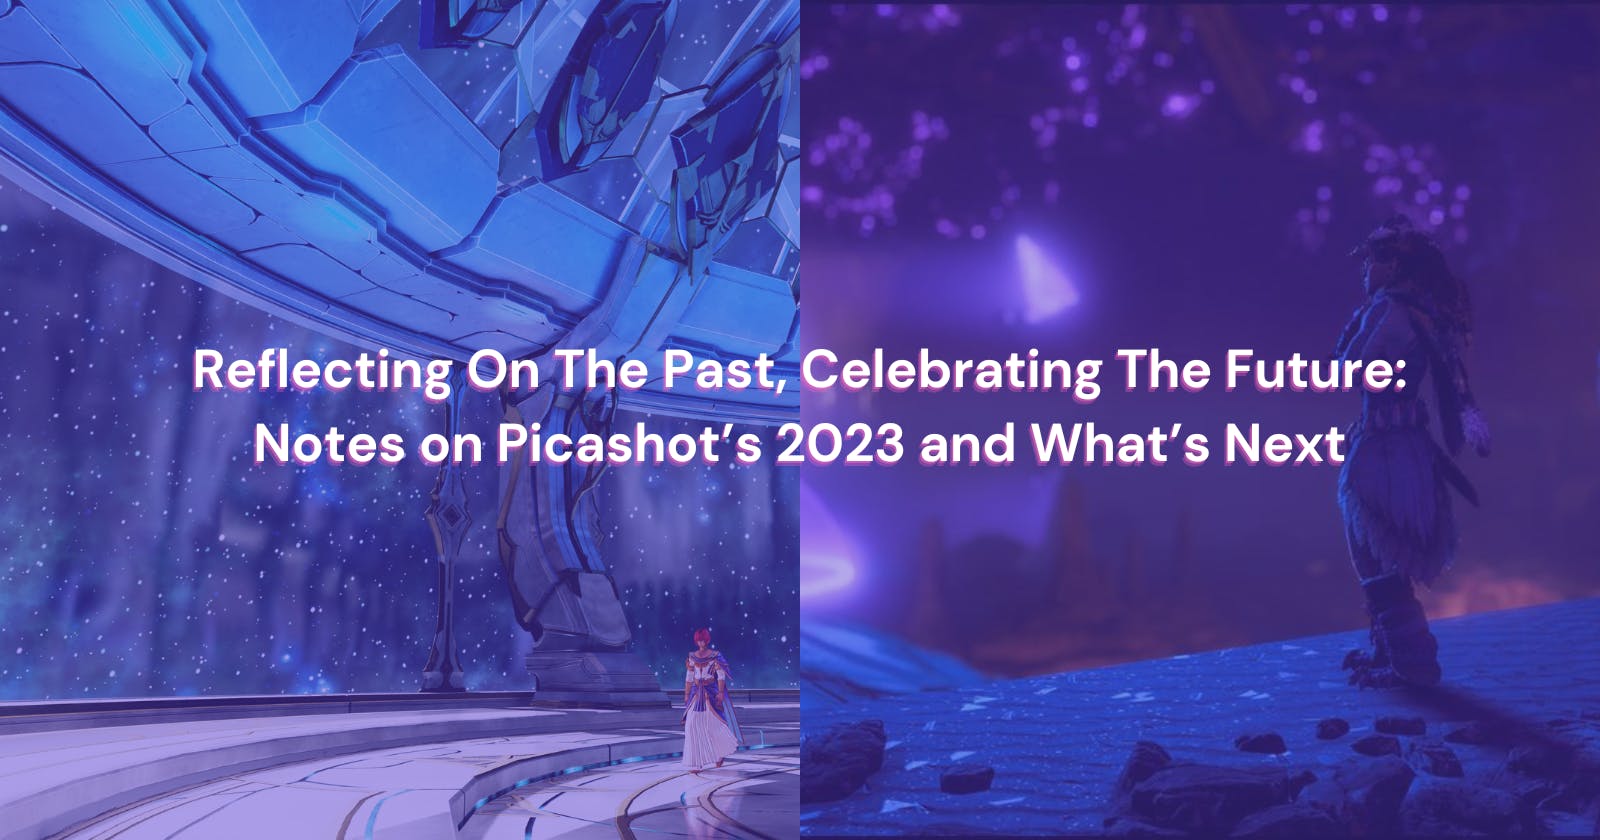 Reflecting On The Past, Celebrating The Future: Notes on Picashot’s 2023 and What’s Next